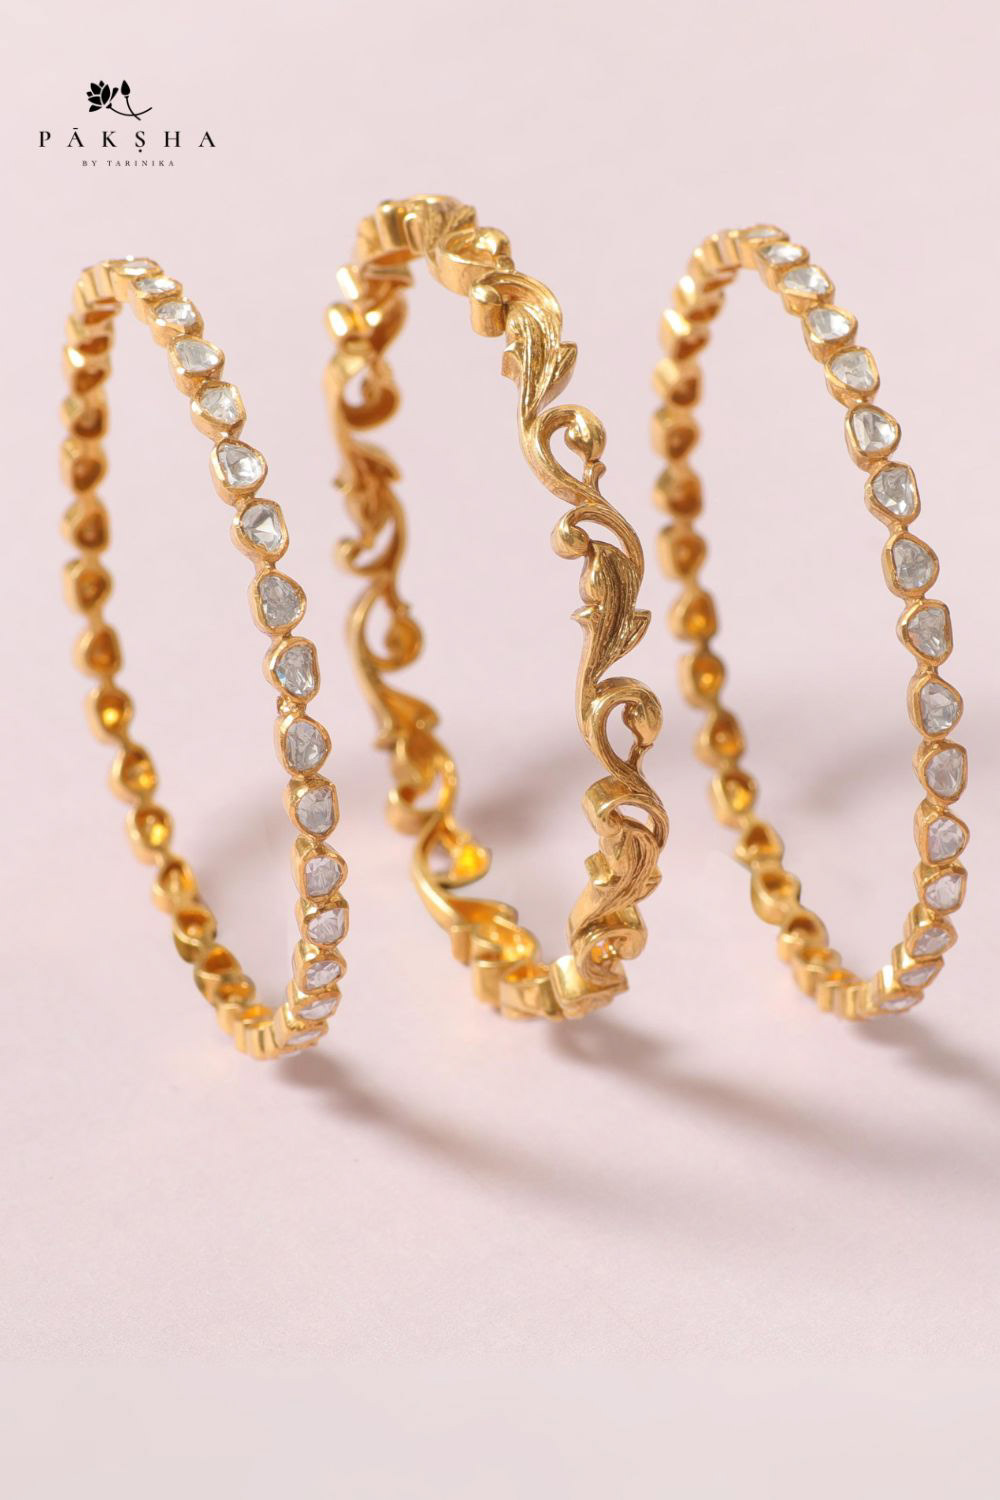 An image of a gold - plated silver bracelet with Moissanite stones by Paksha